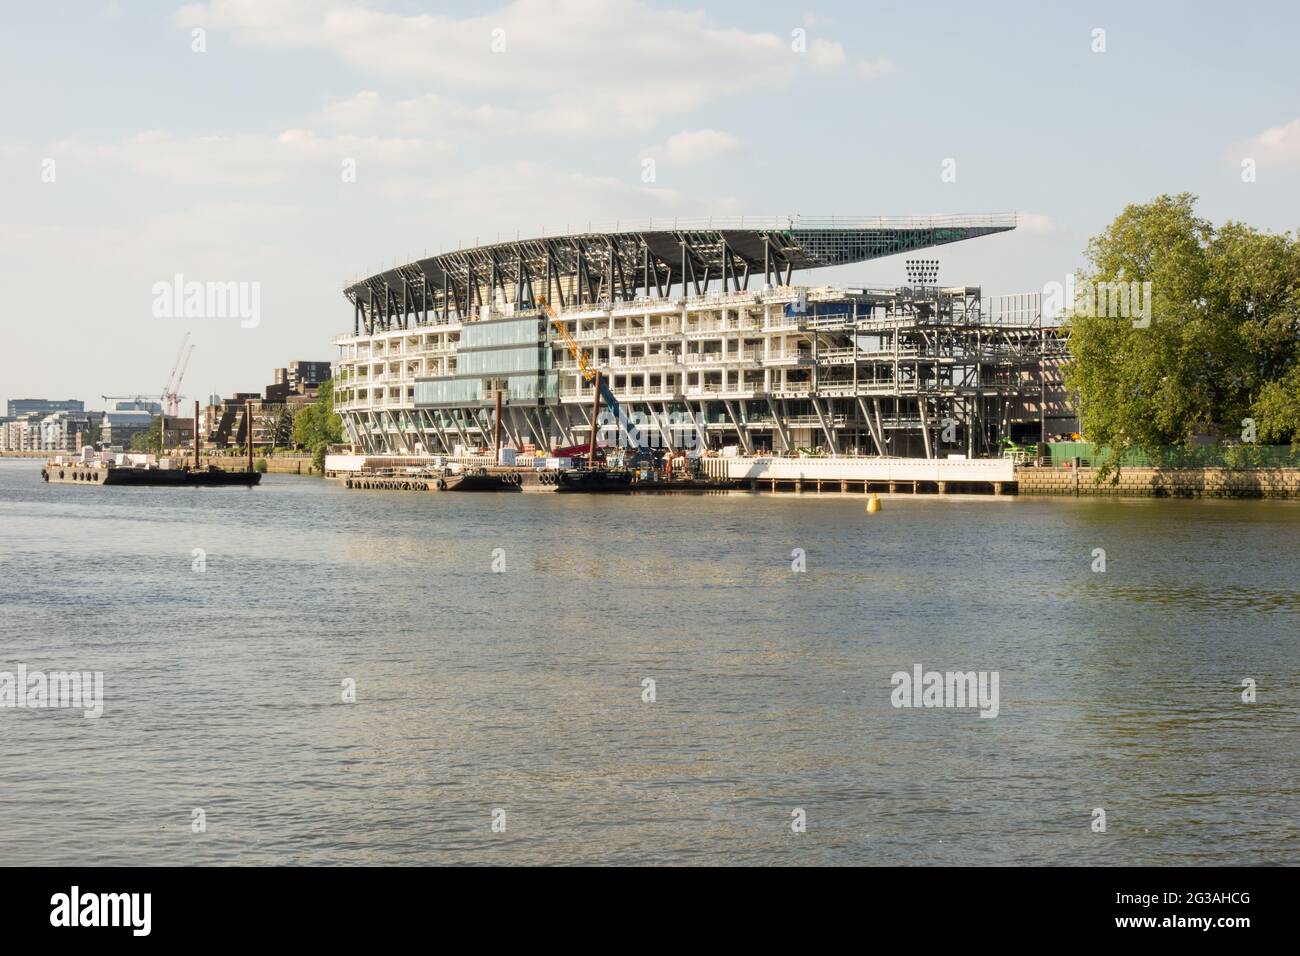 Craven Cottage, Fulham Football Club's new Riverside Stand under construction on the banks of the River Thames in southwest London, England, U.K. Stock Photo